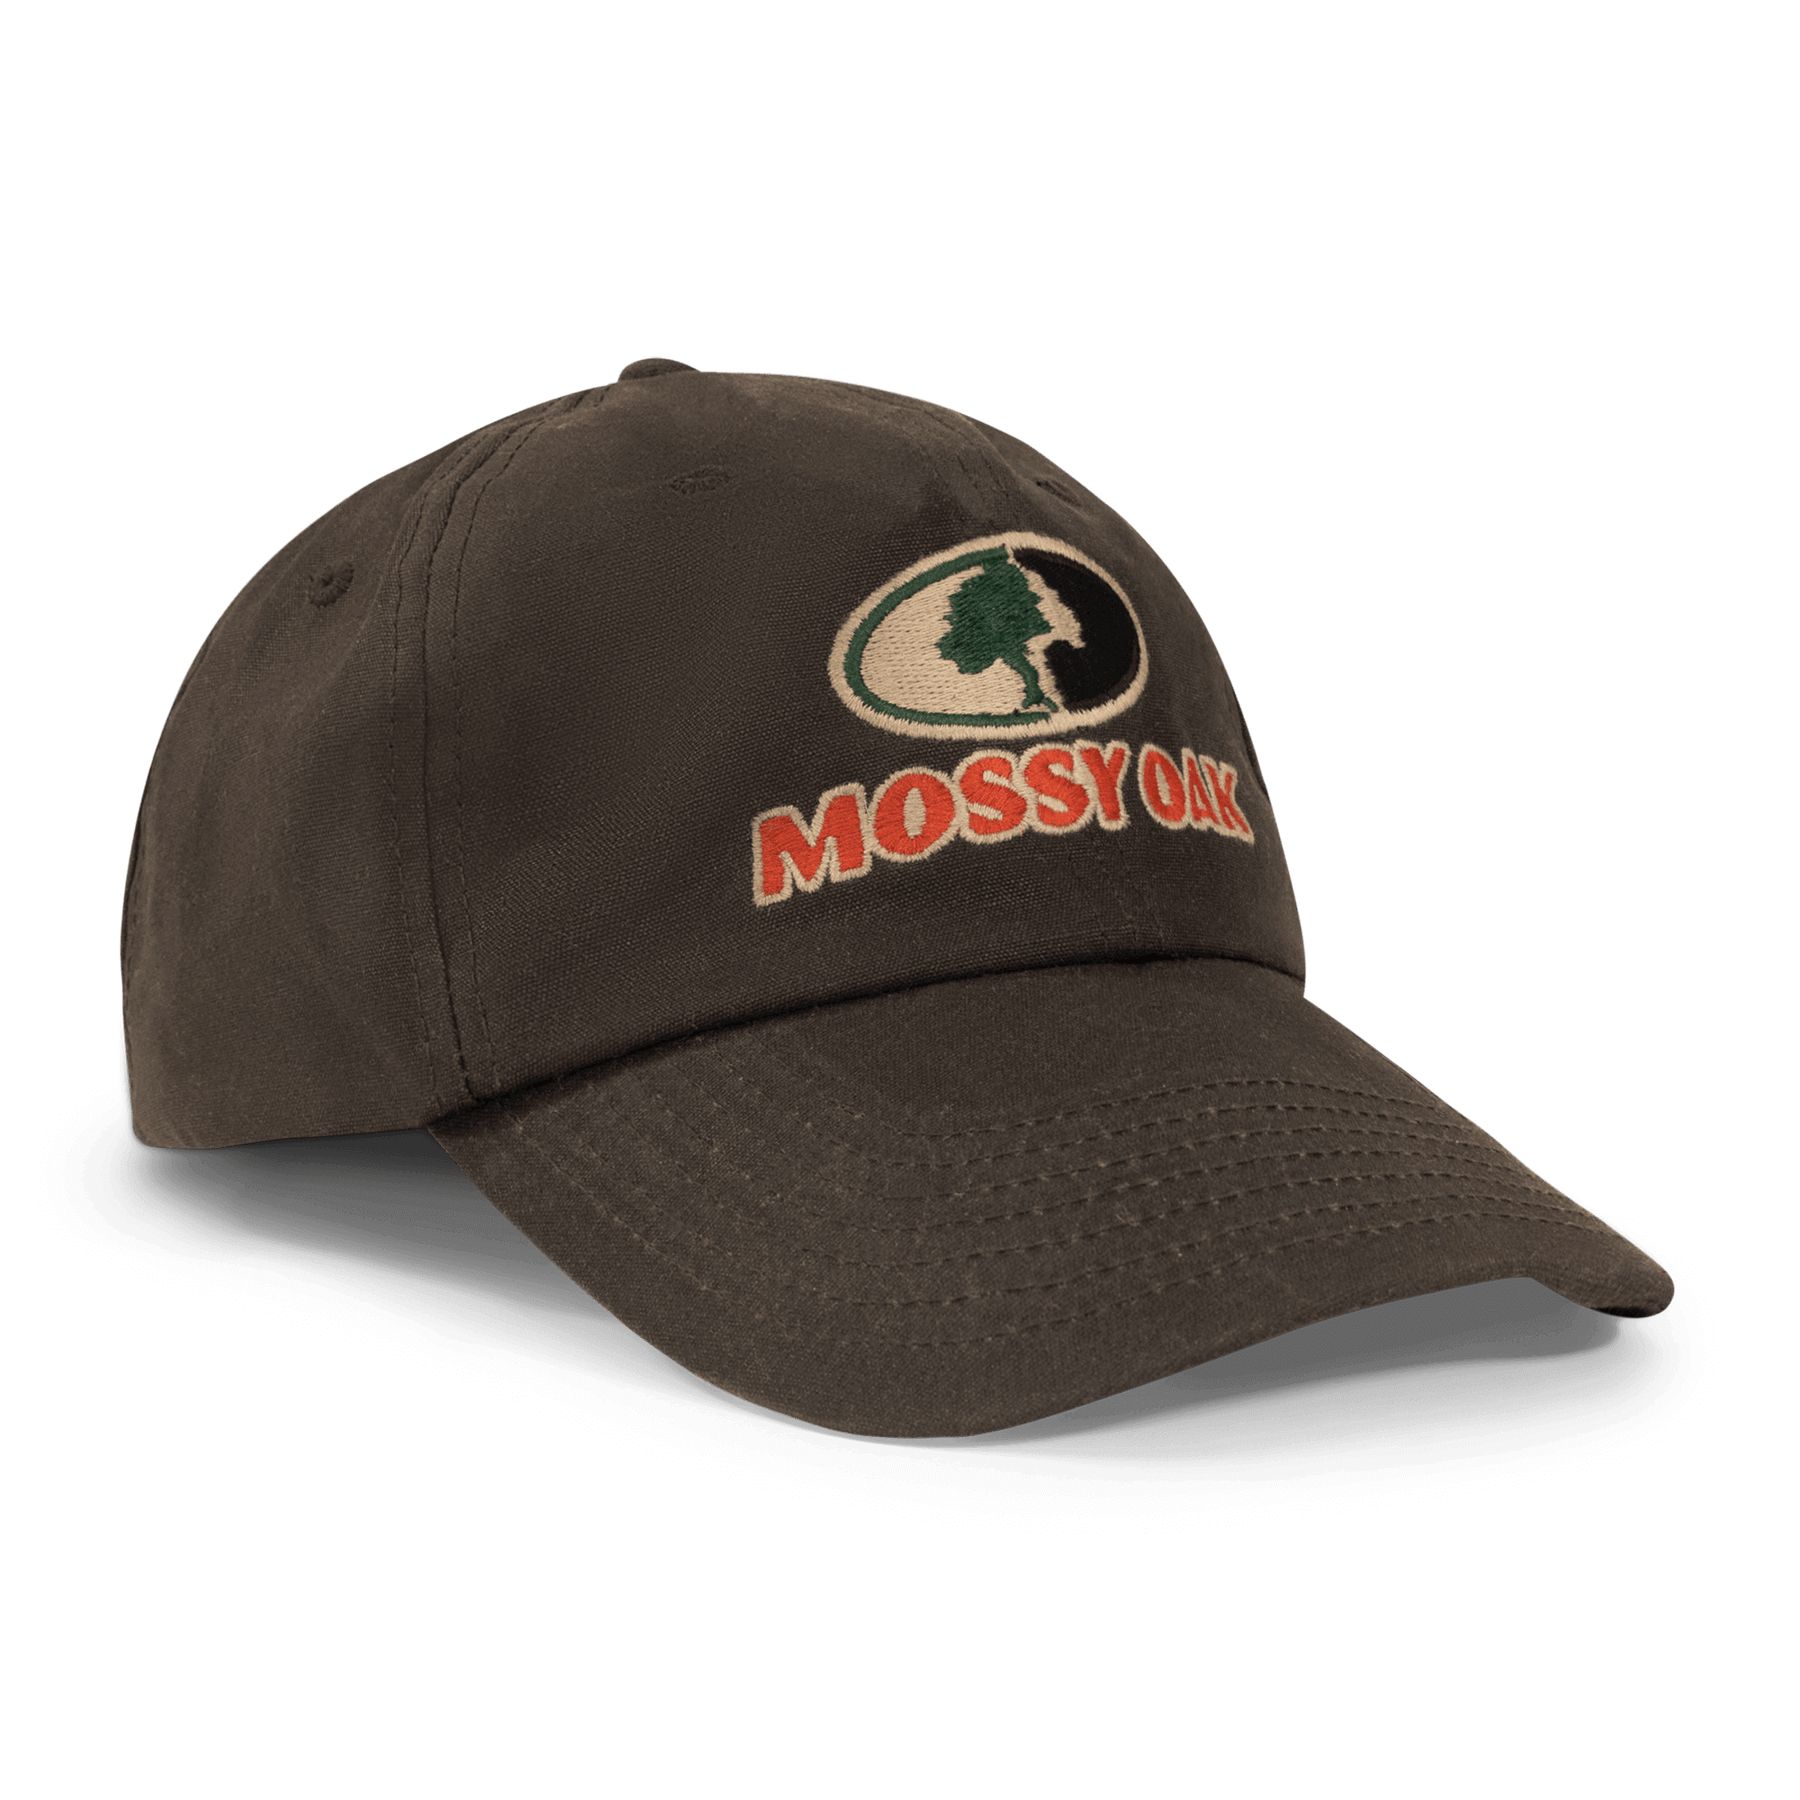 Companions Waxed Cotton Hat – The Mossy Oak Store